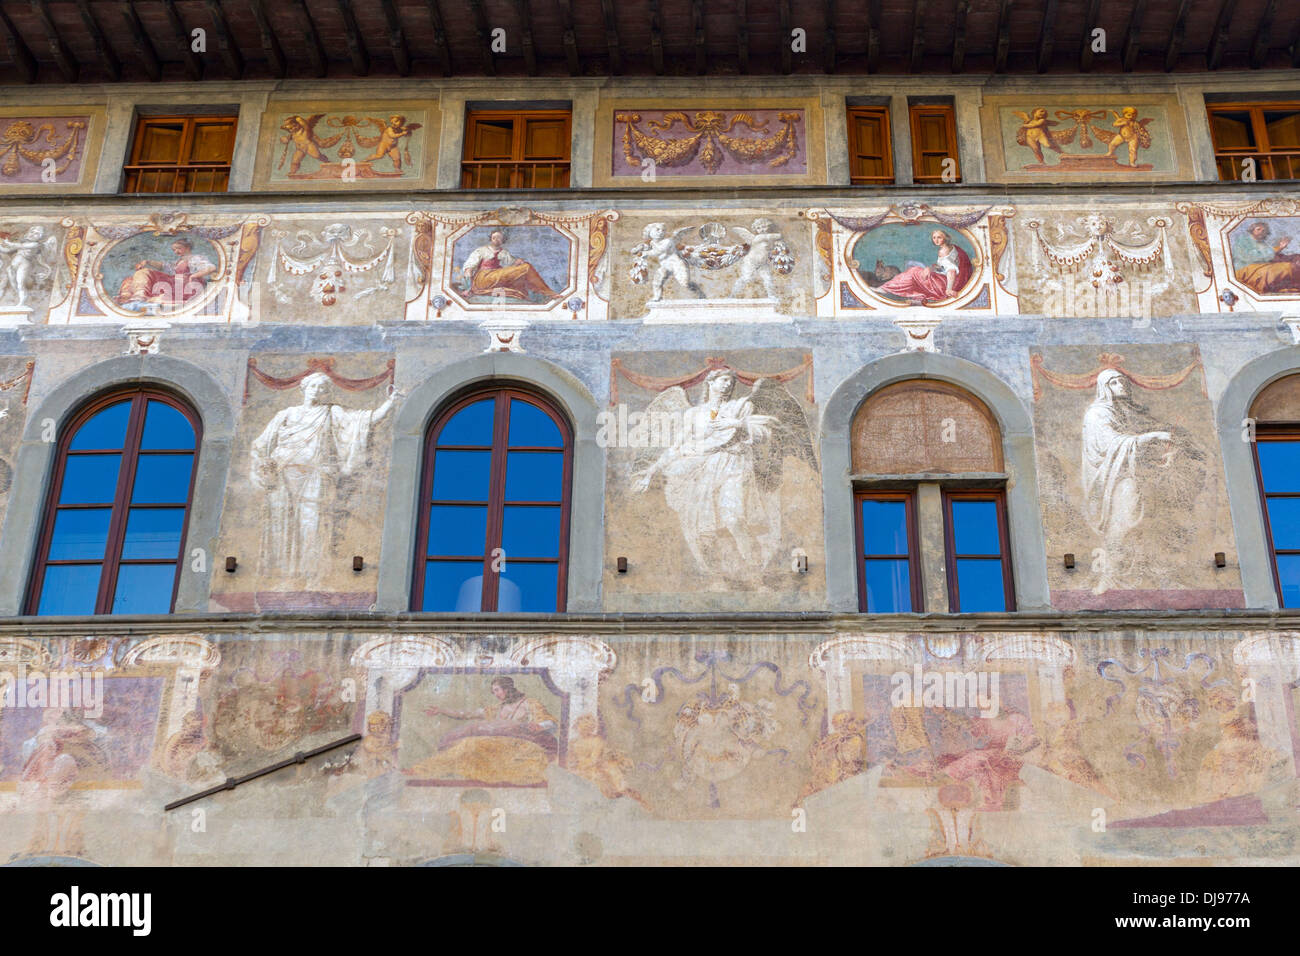 Murals on wall of a palazzo, Piazza Santa Croce, Florence, Italy Stock Photo